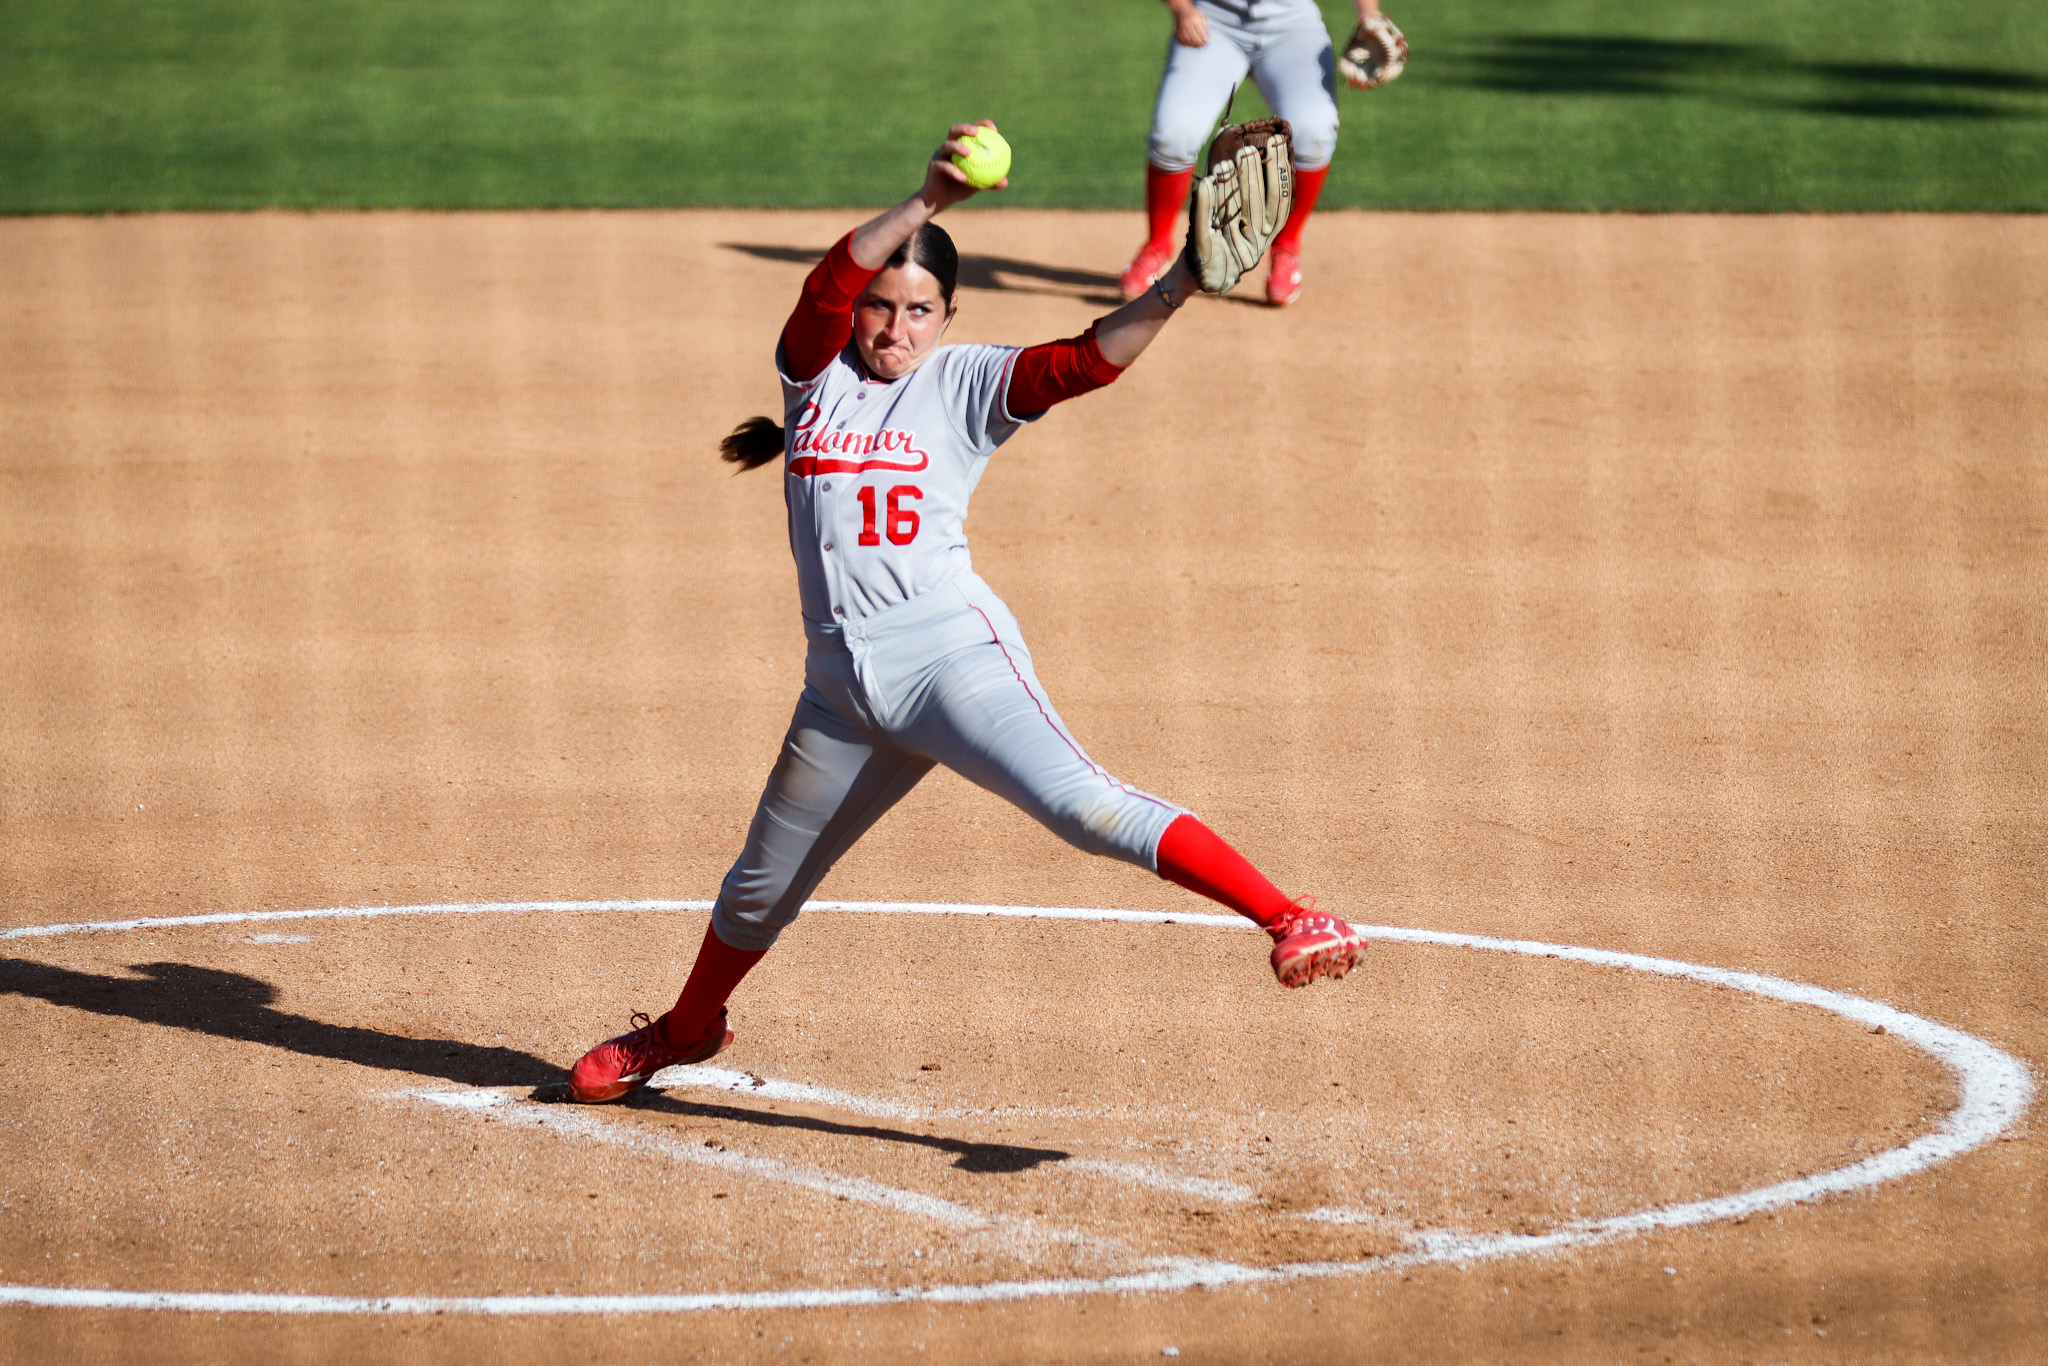 India Caldwell recorded 13 strikeouts on the first day of the CCCAA State Championship. Photo by Cara Heise.